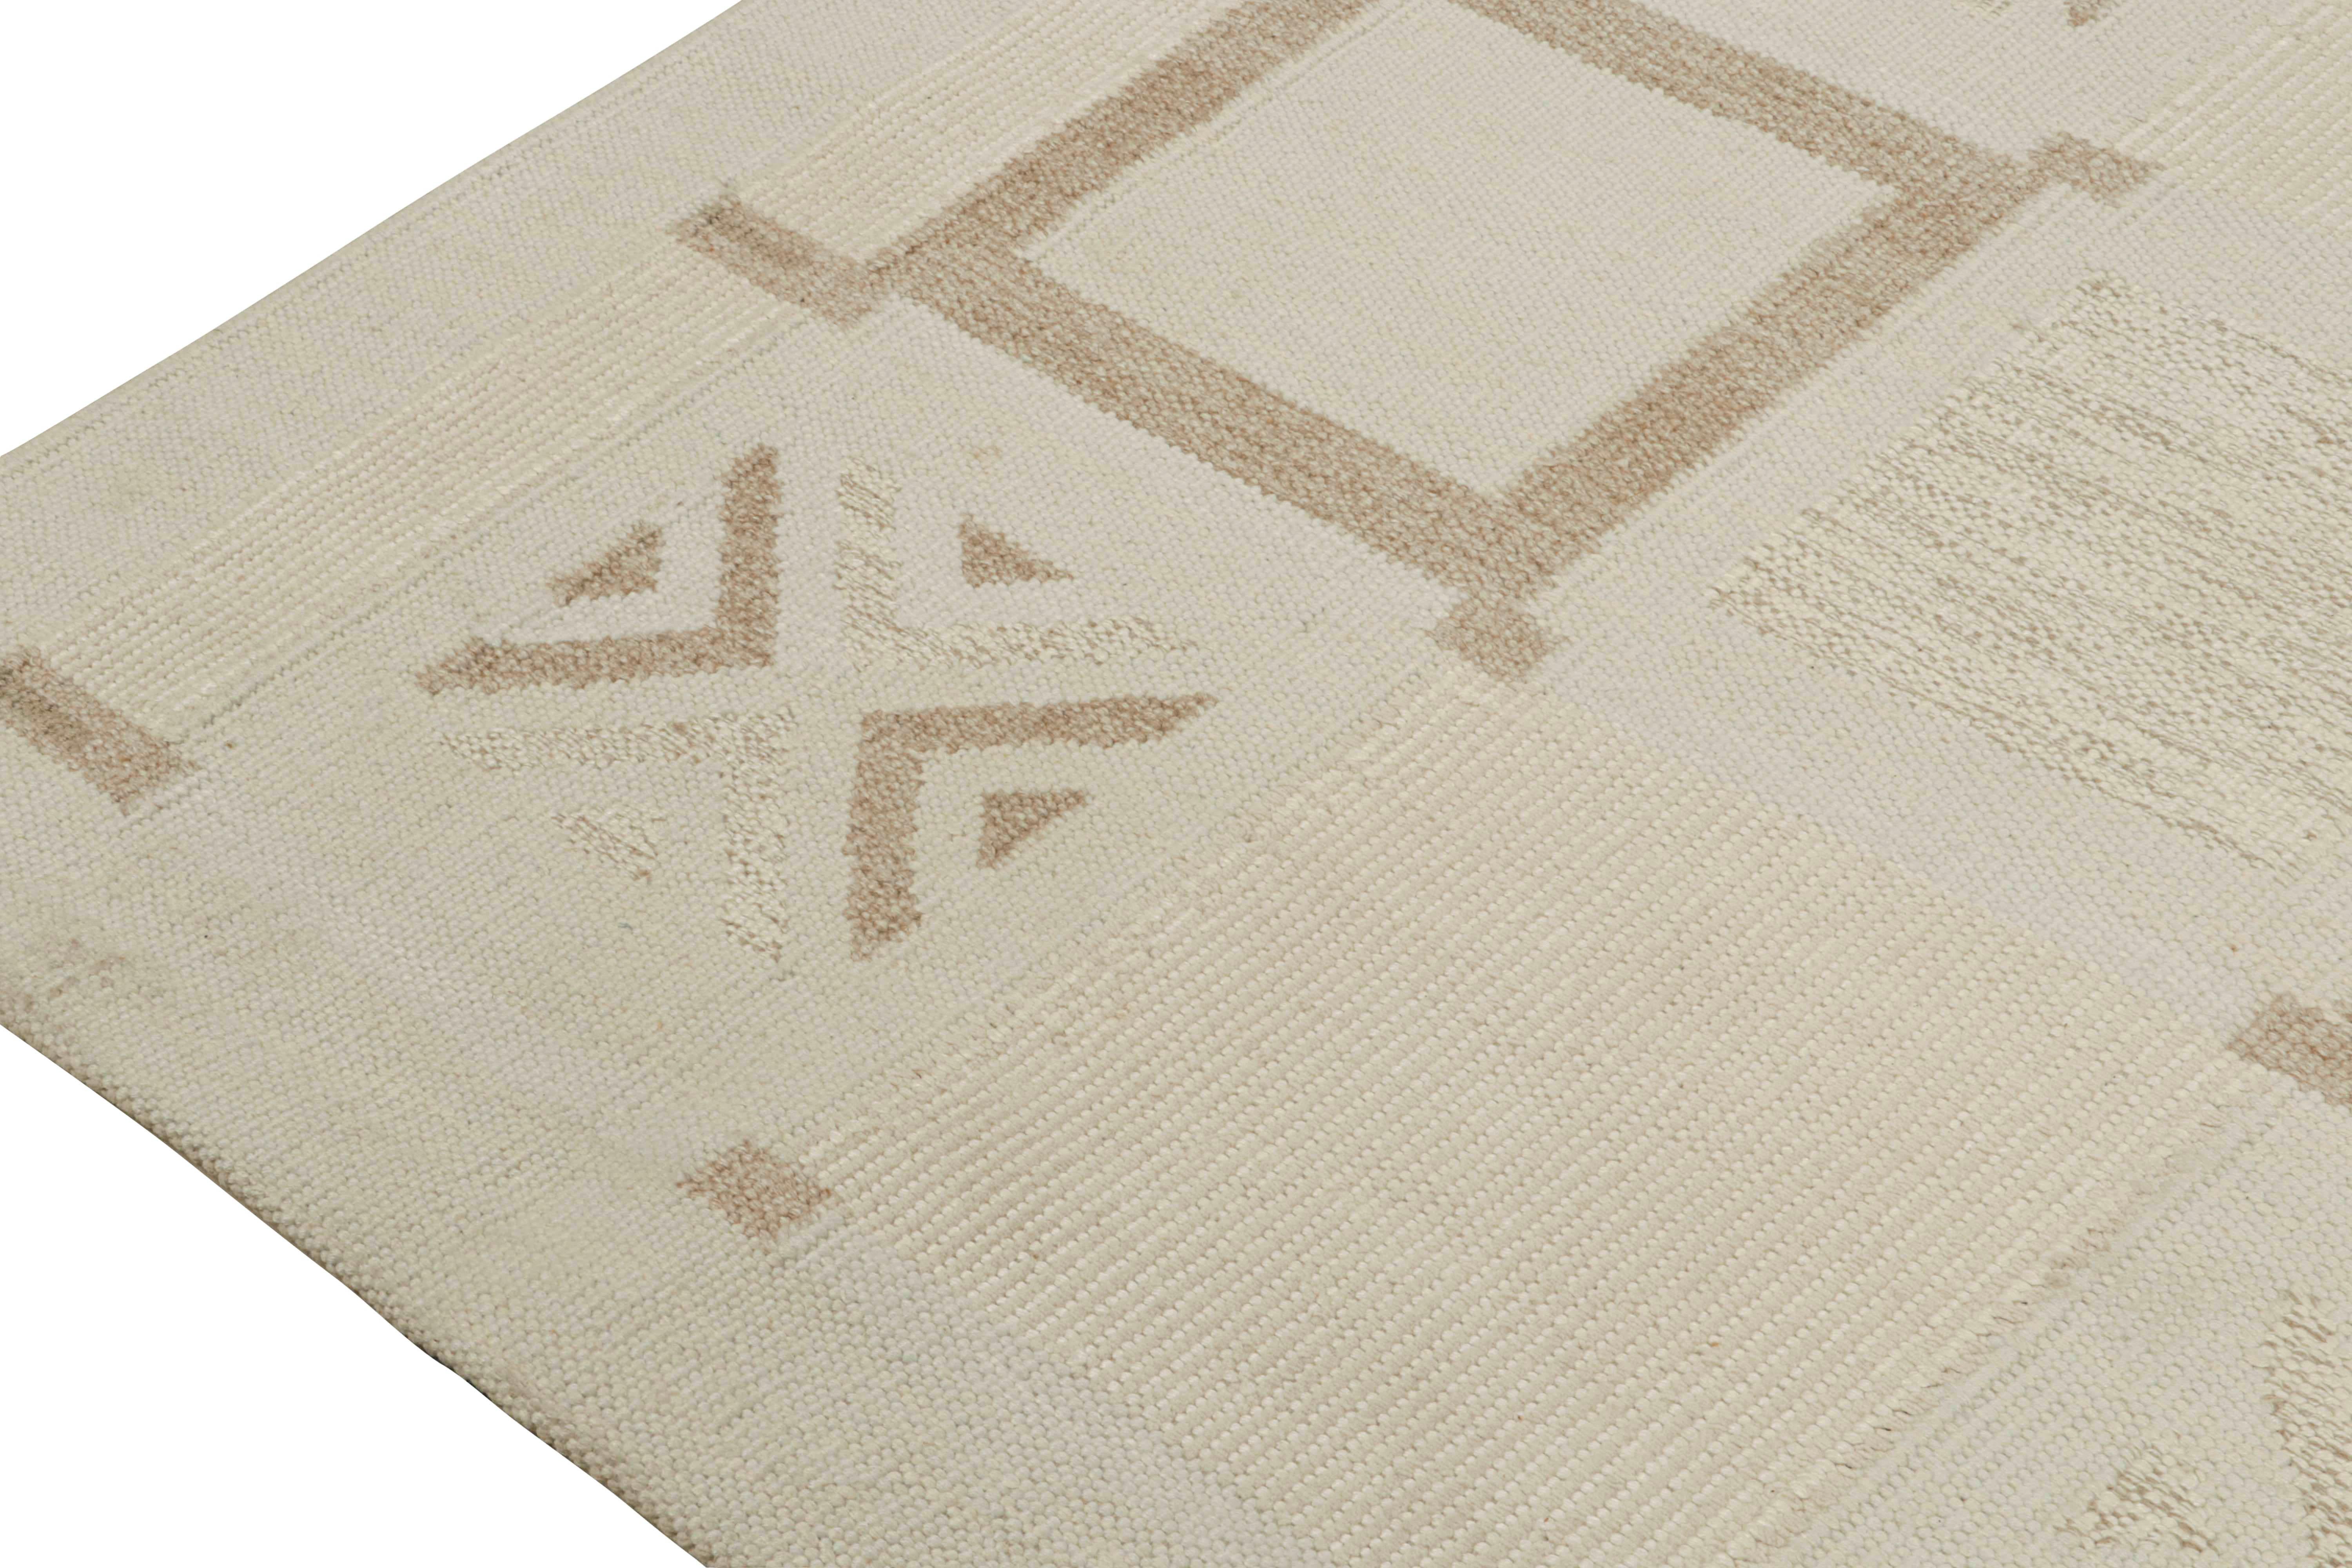 Hand-Knotted Rug & Kilim’s Scandinavian style Kilim in White & Beige-Brown Geometric Patterns For Sale